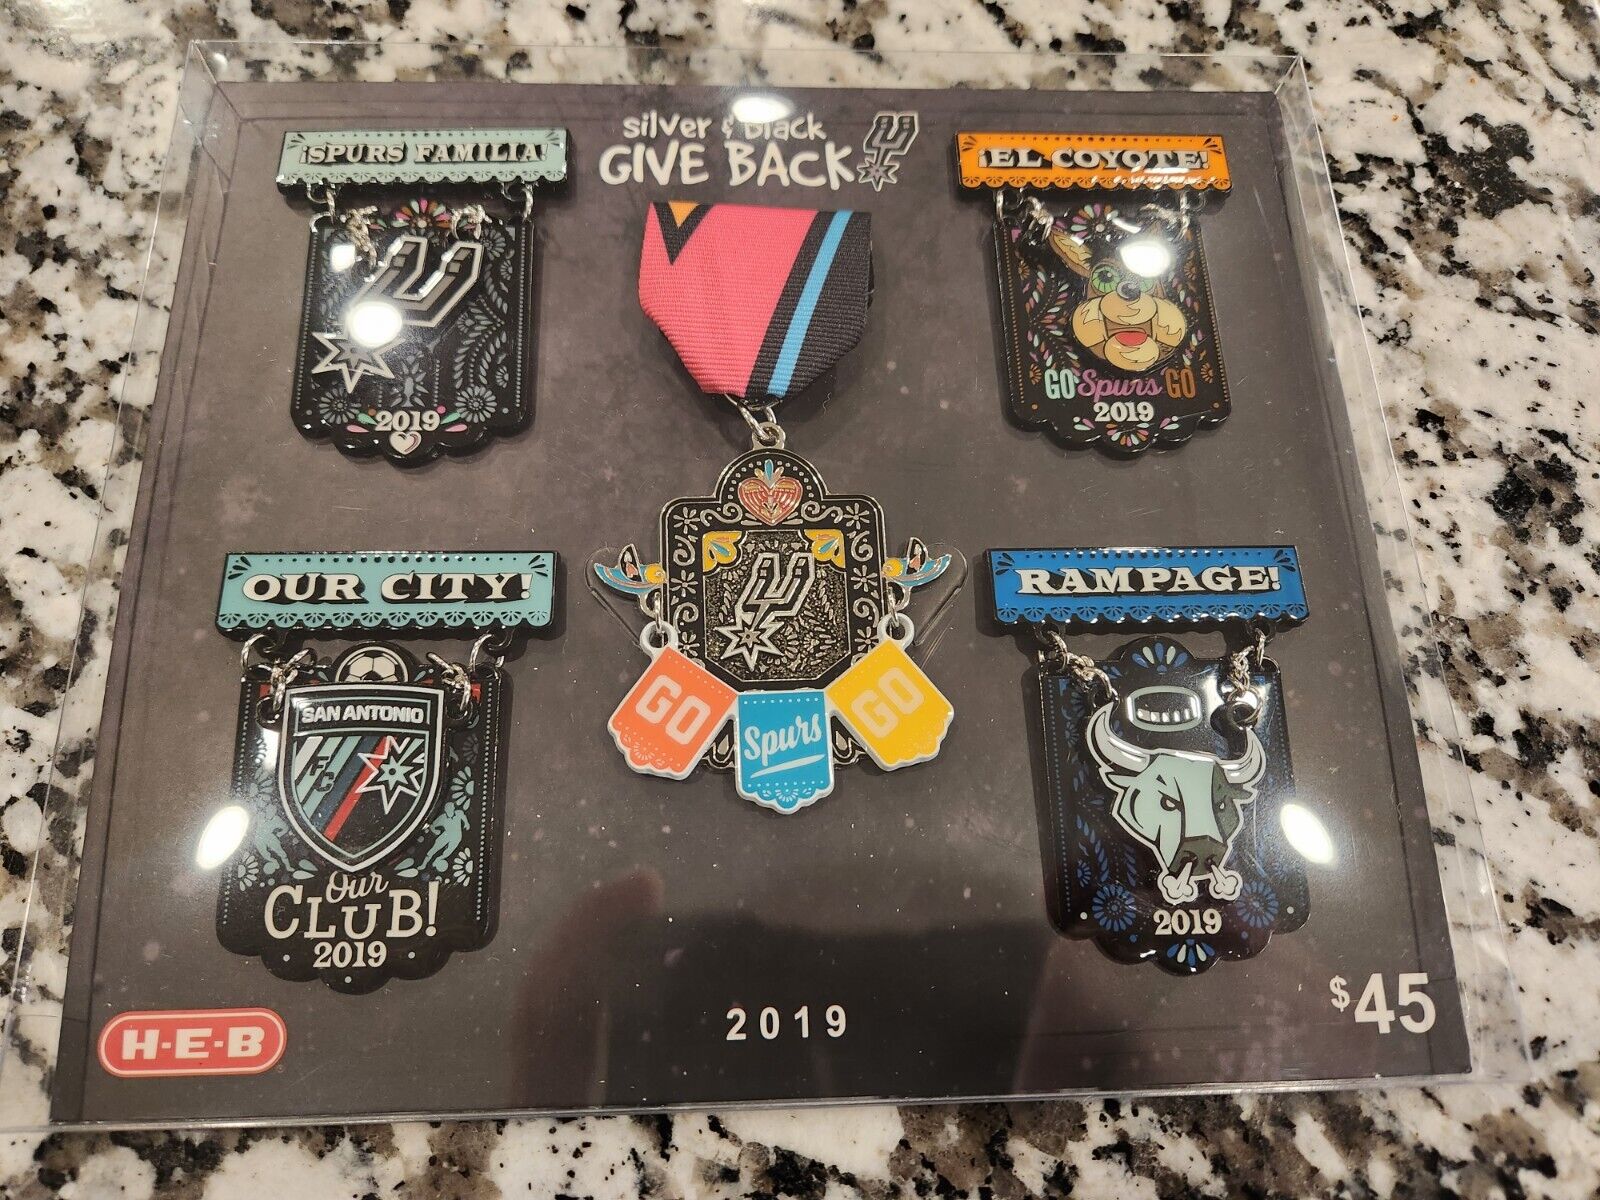 RARE 2019 Silver and Black Gives Back Spurs 5-pack fiesta medals